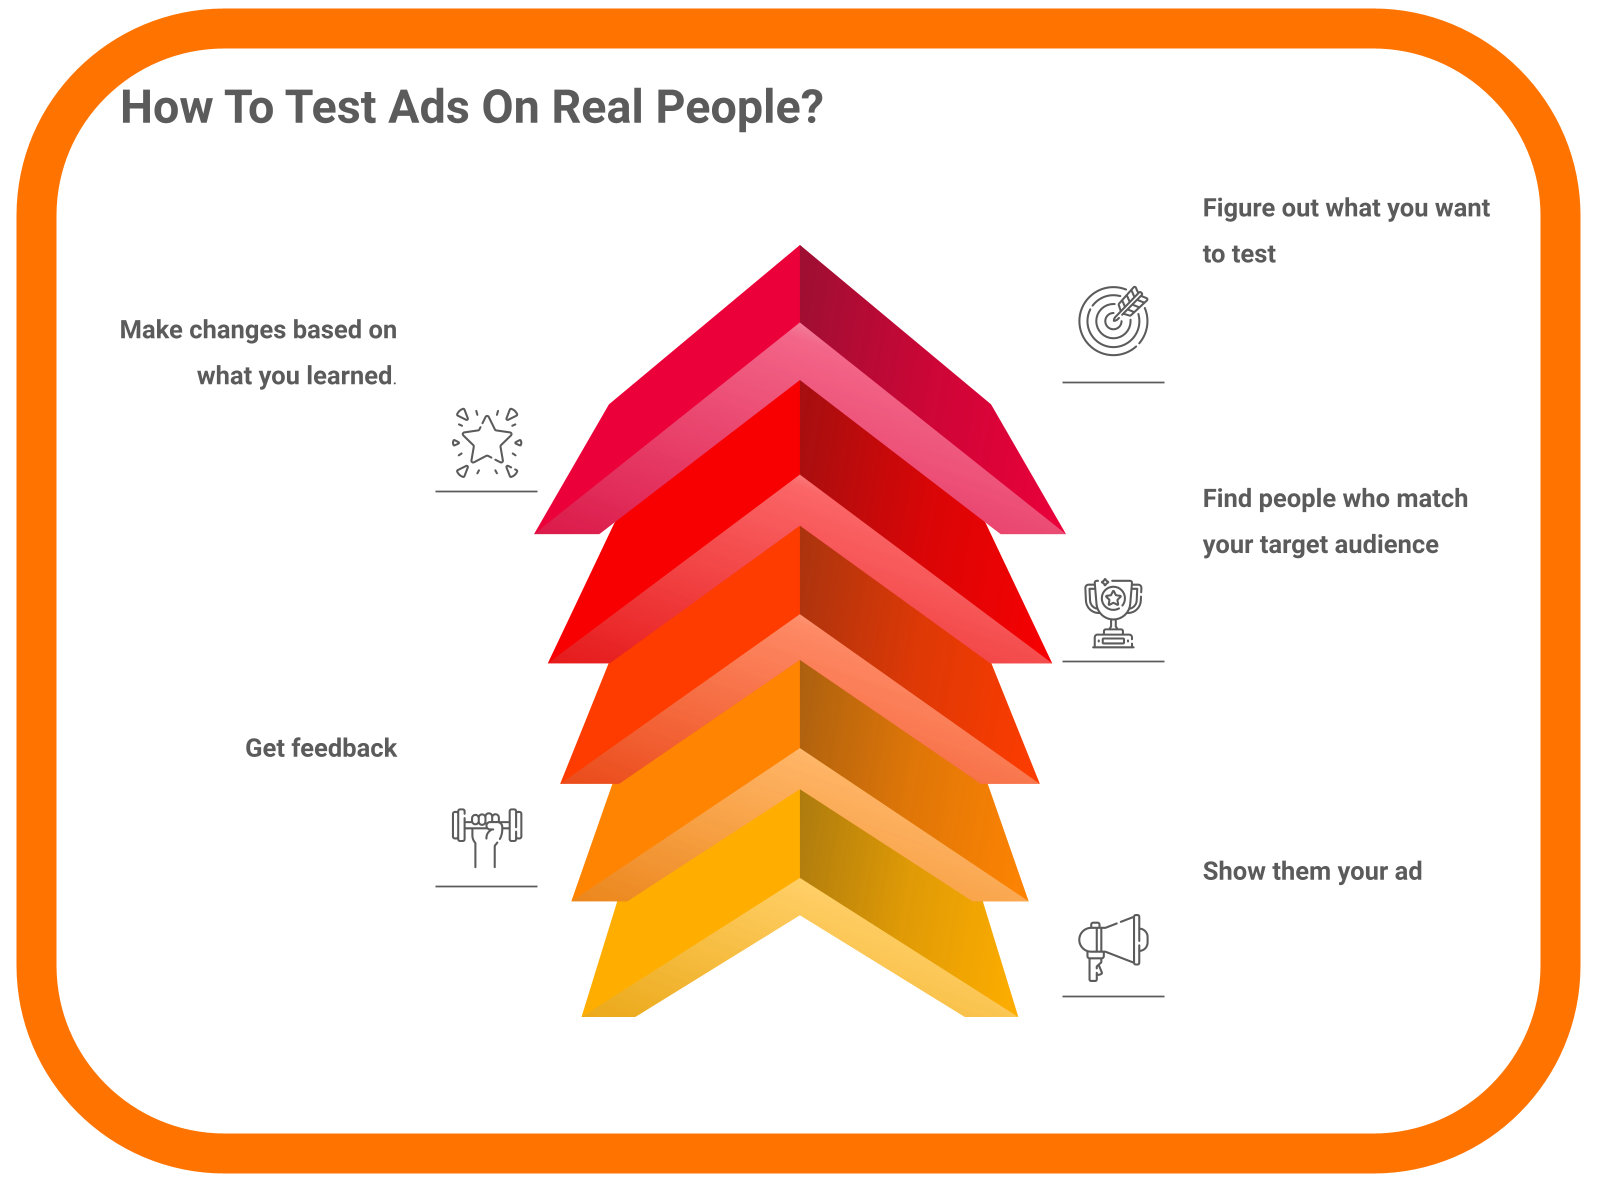 How To Test Ads On Real People?